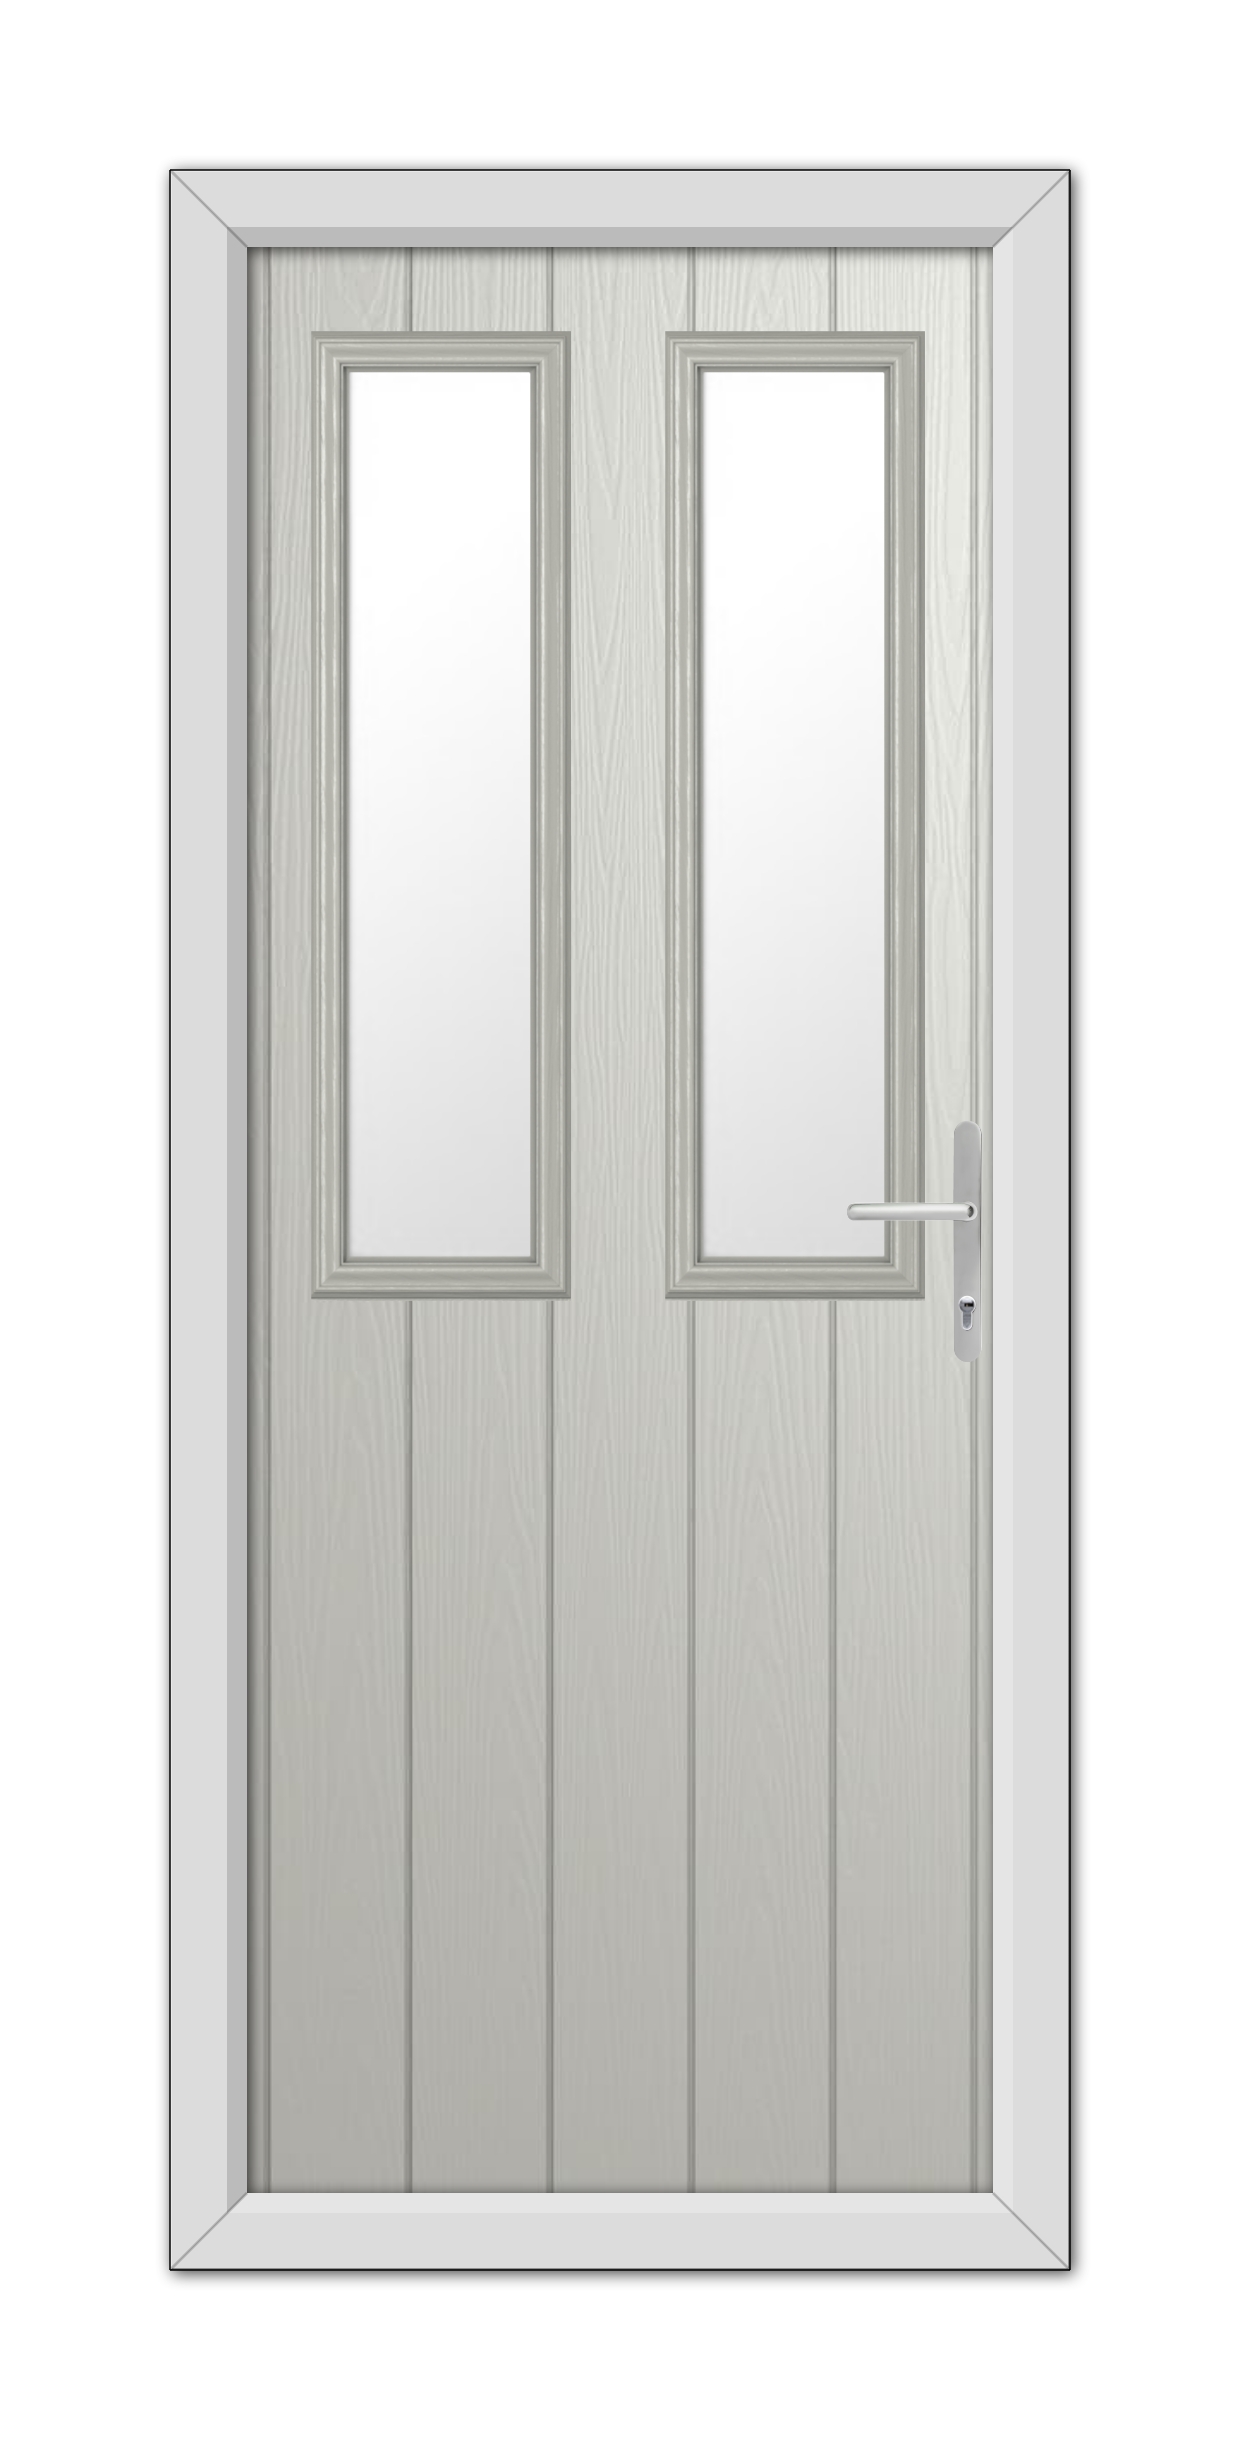 Double door with a modern design featuring a light wood finish and two vertical glass panels, equipped with a metal handle on the Agate Grey Wellington Composite Door 48mm Timber Core.